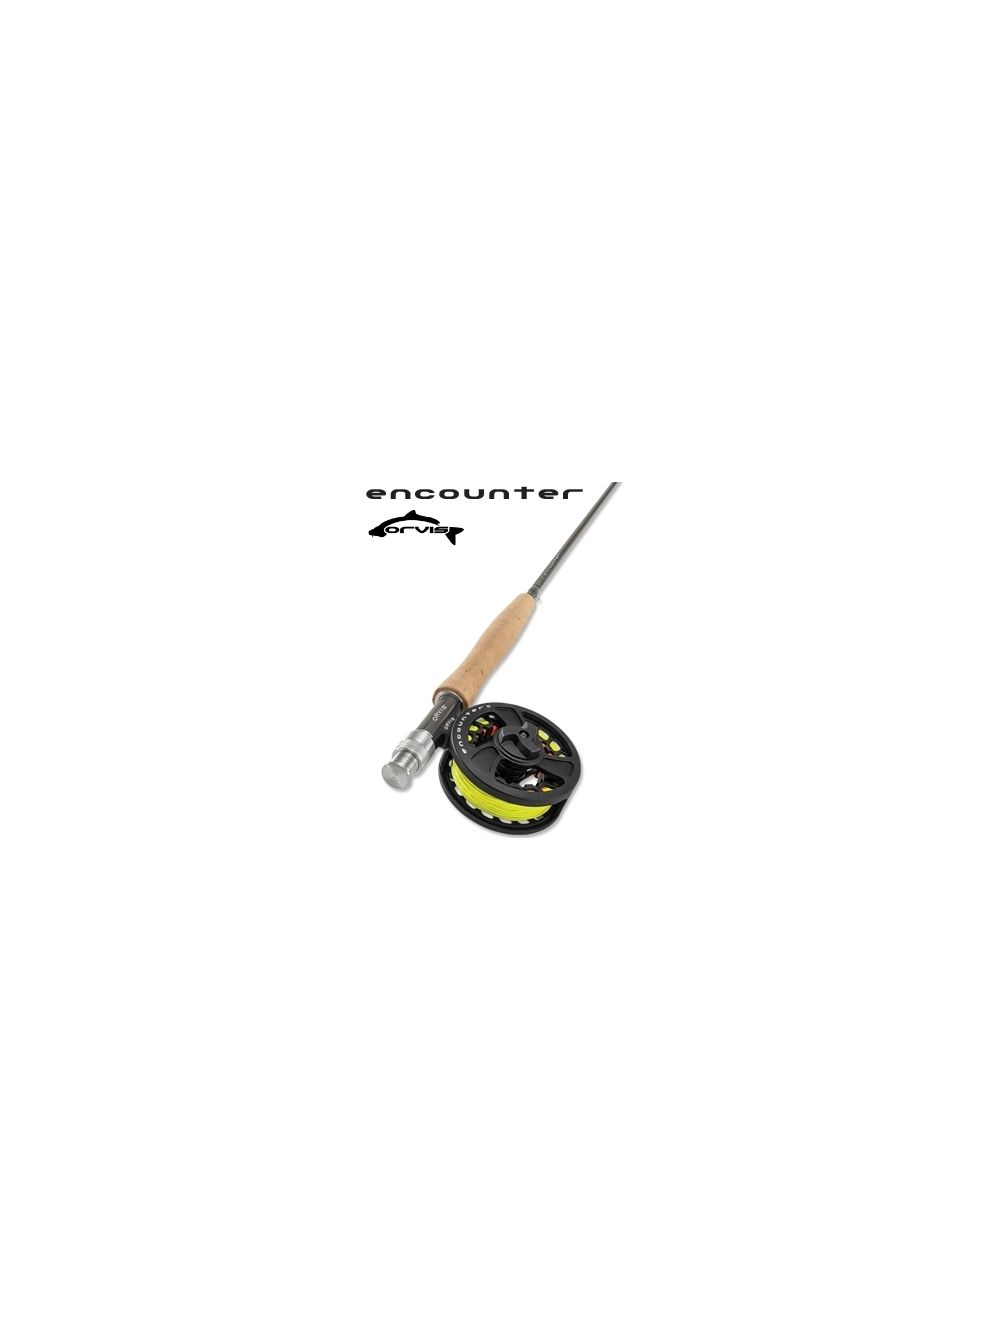 Orvis Encounter 9' 5wt Fly Rod and Reel Outfit